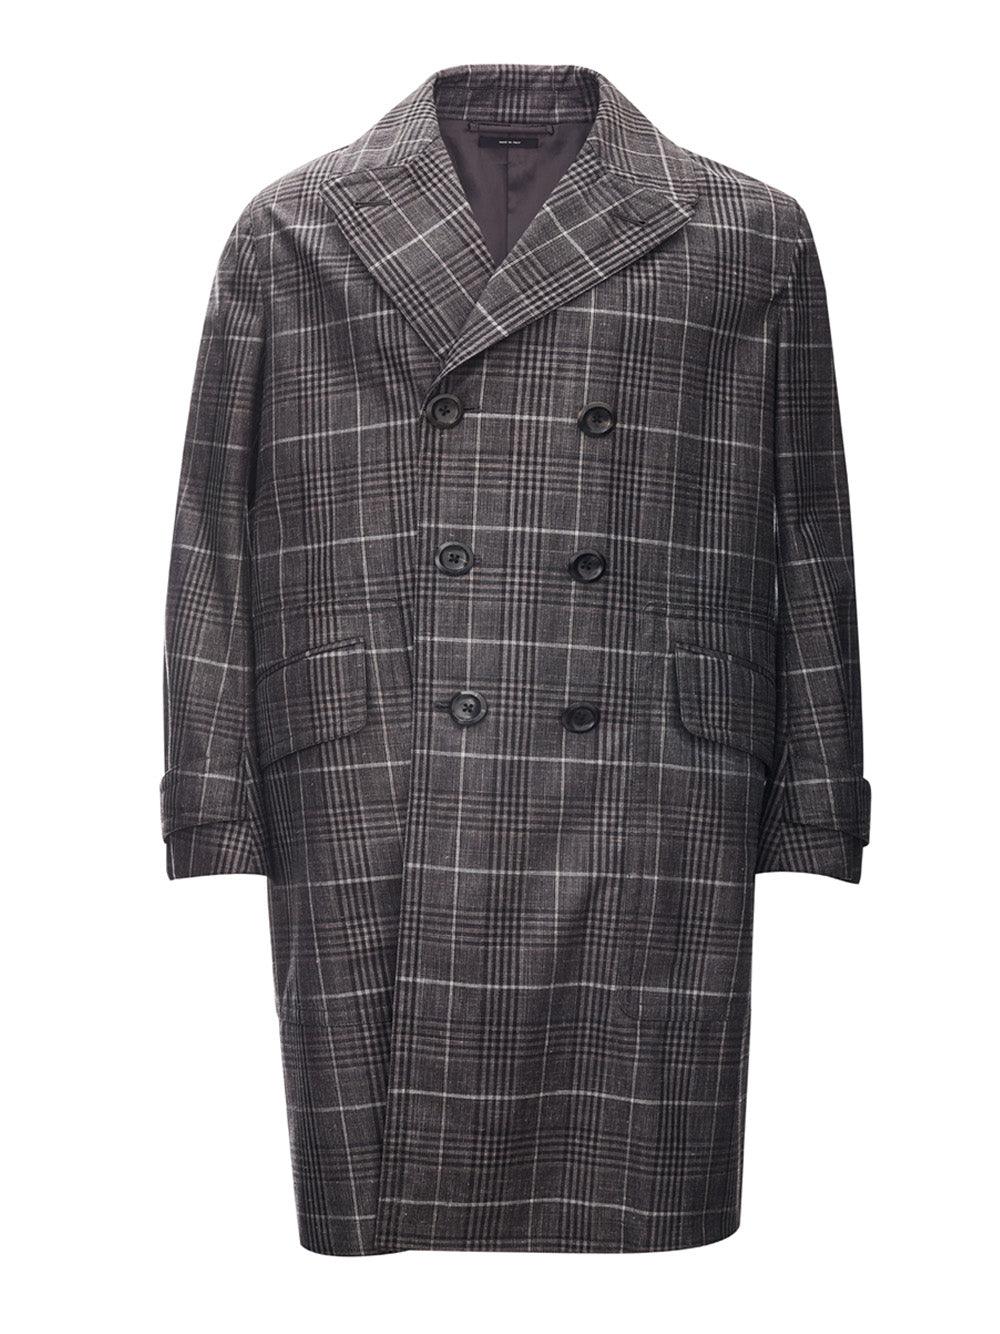 Tom Ford Grey Checked Mid-Length Trench - Ellie Belle